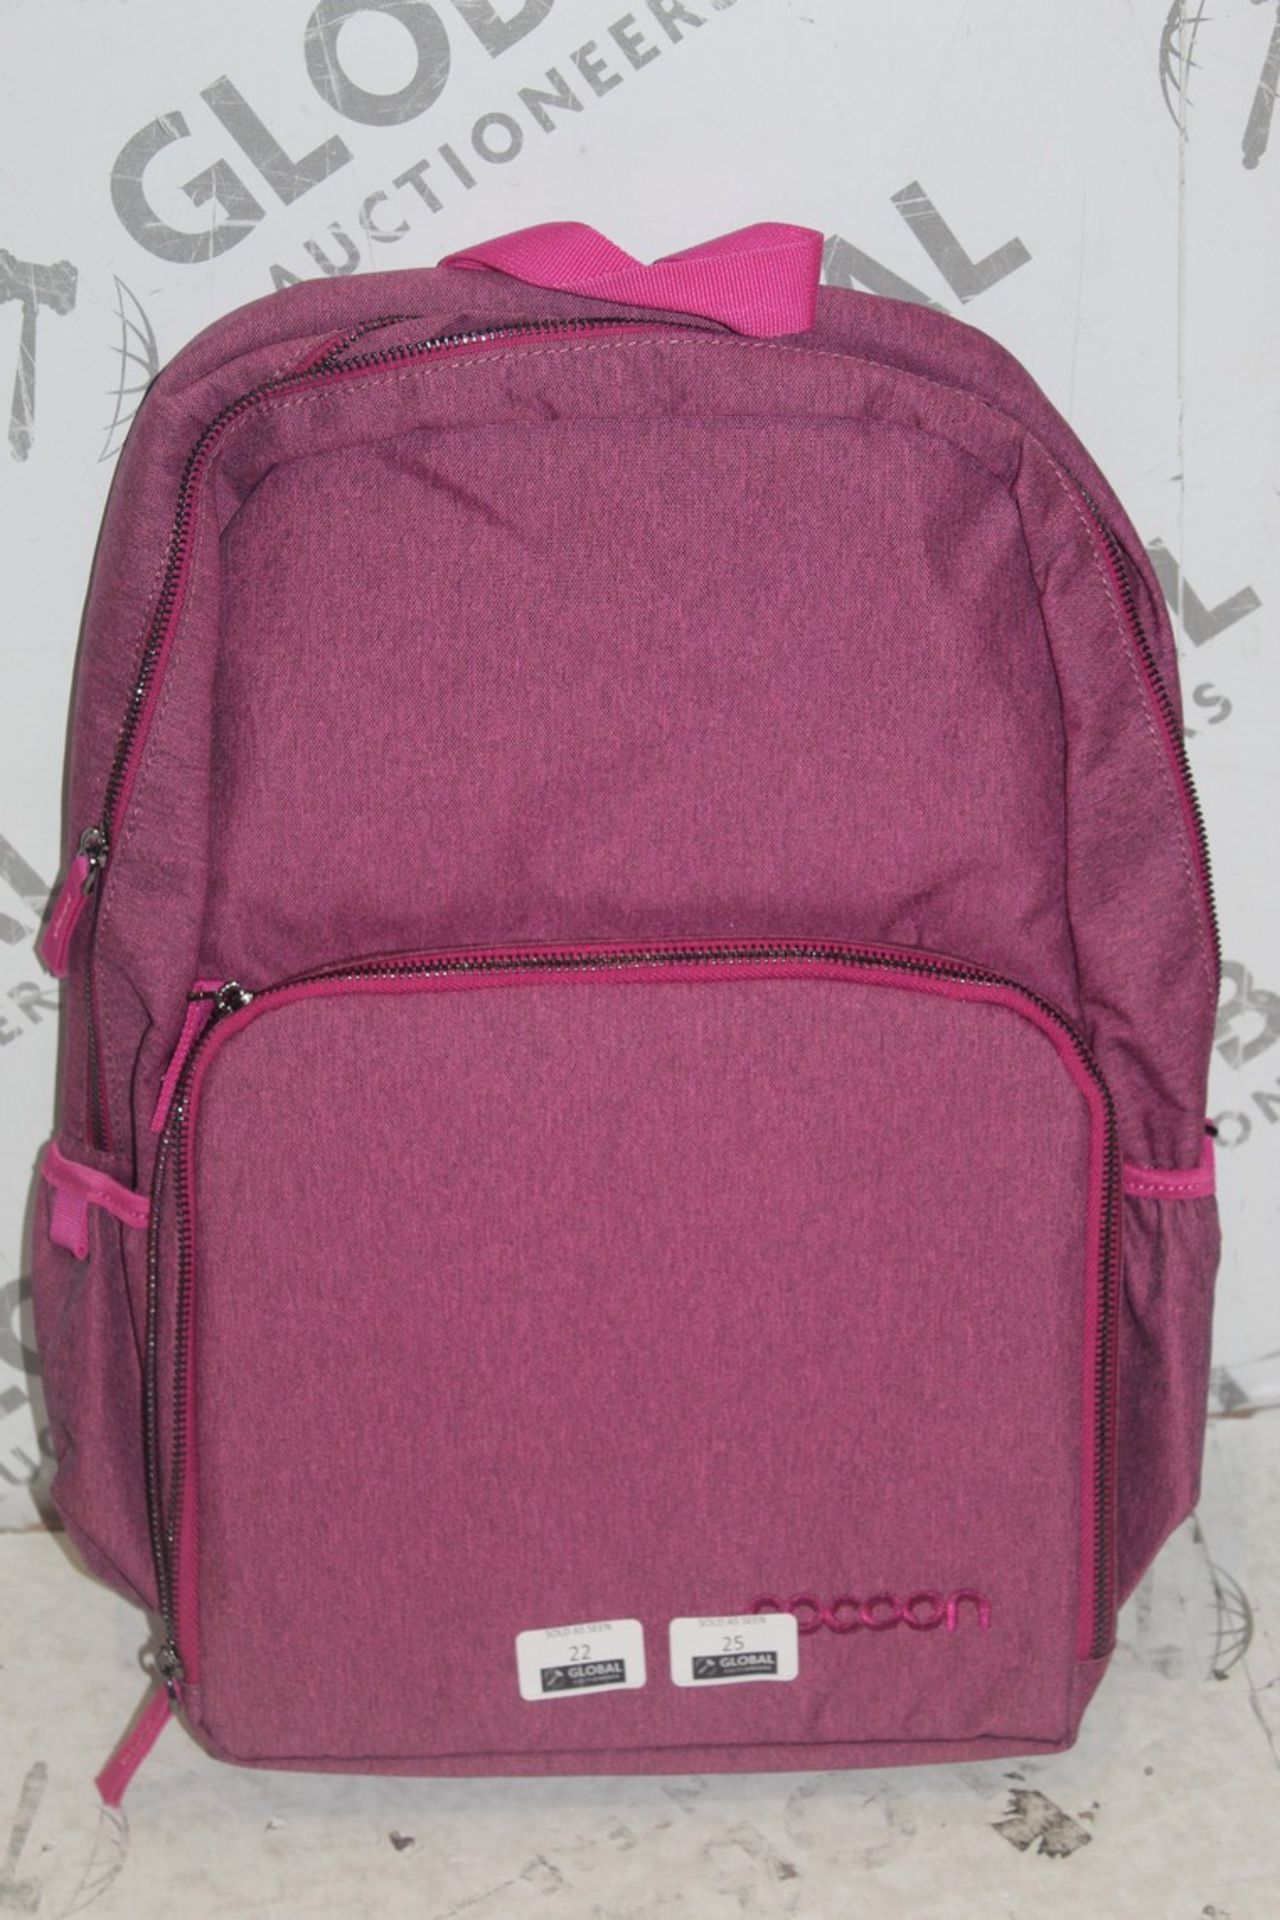 Cocoon 15" Laptop Rucksack With Built In Grid It RRP £70 (Pictures Are For Illustration Purposes